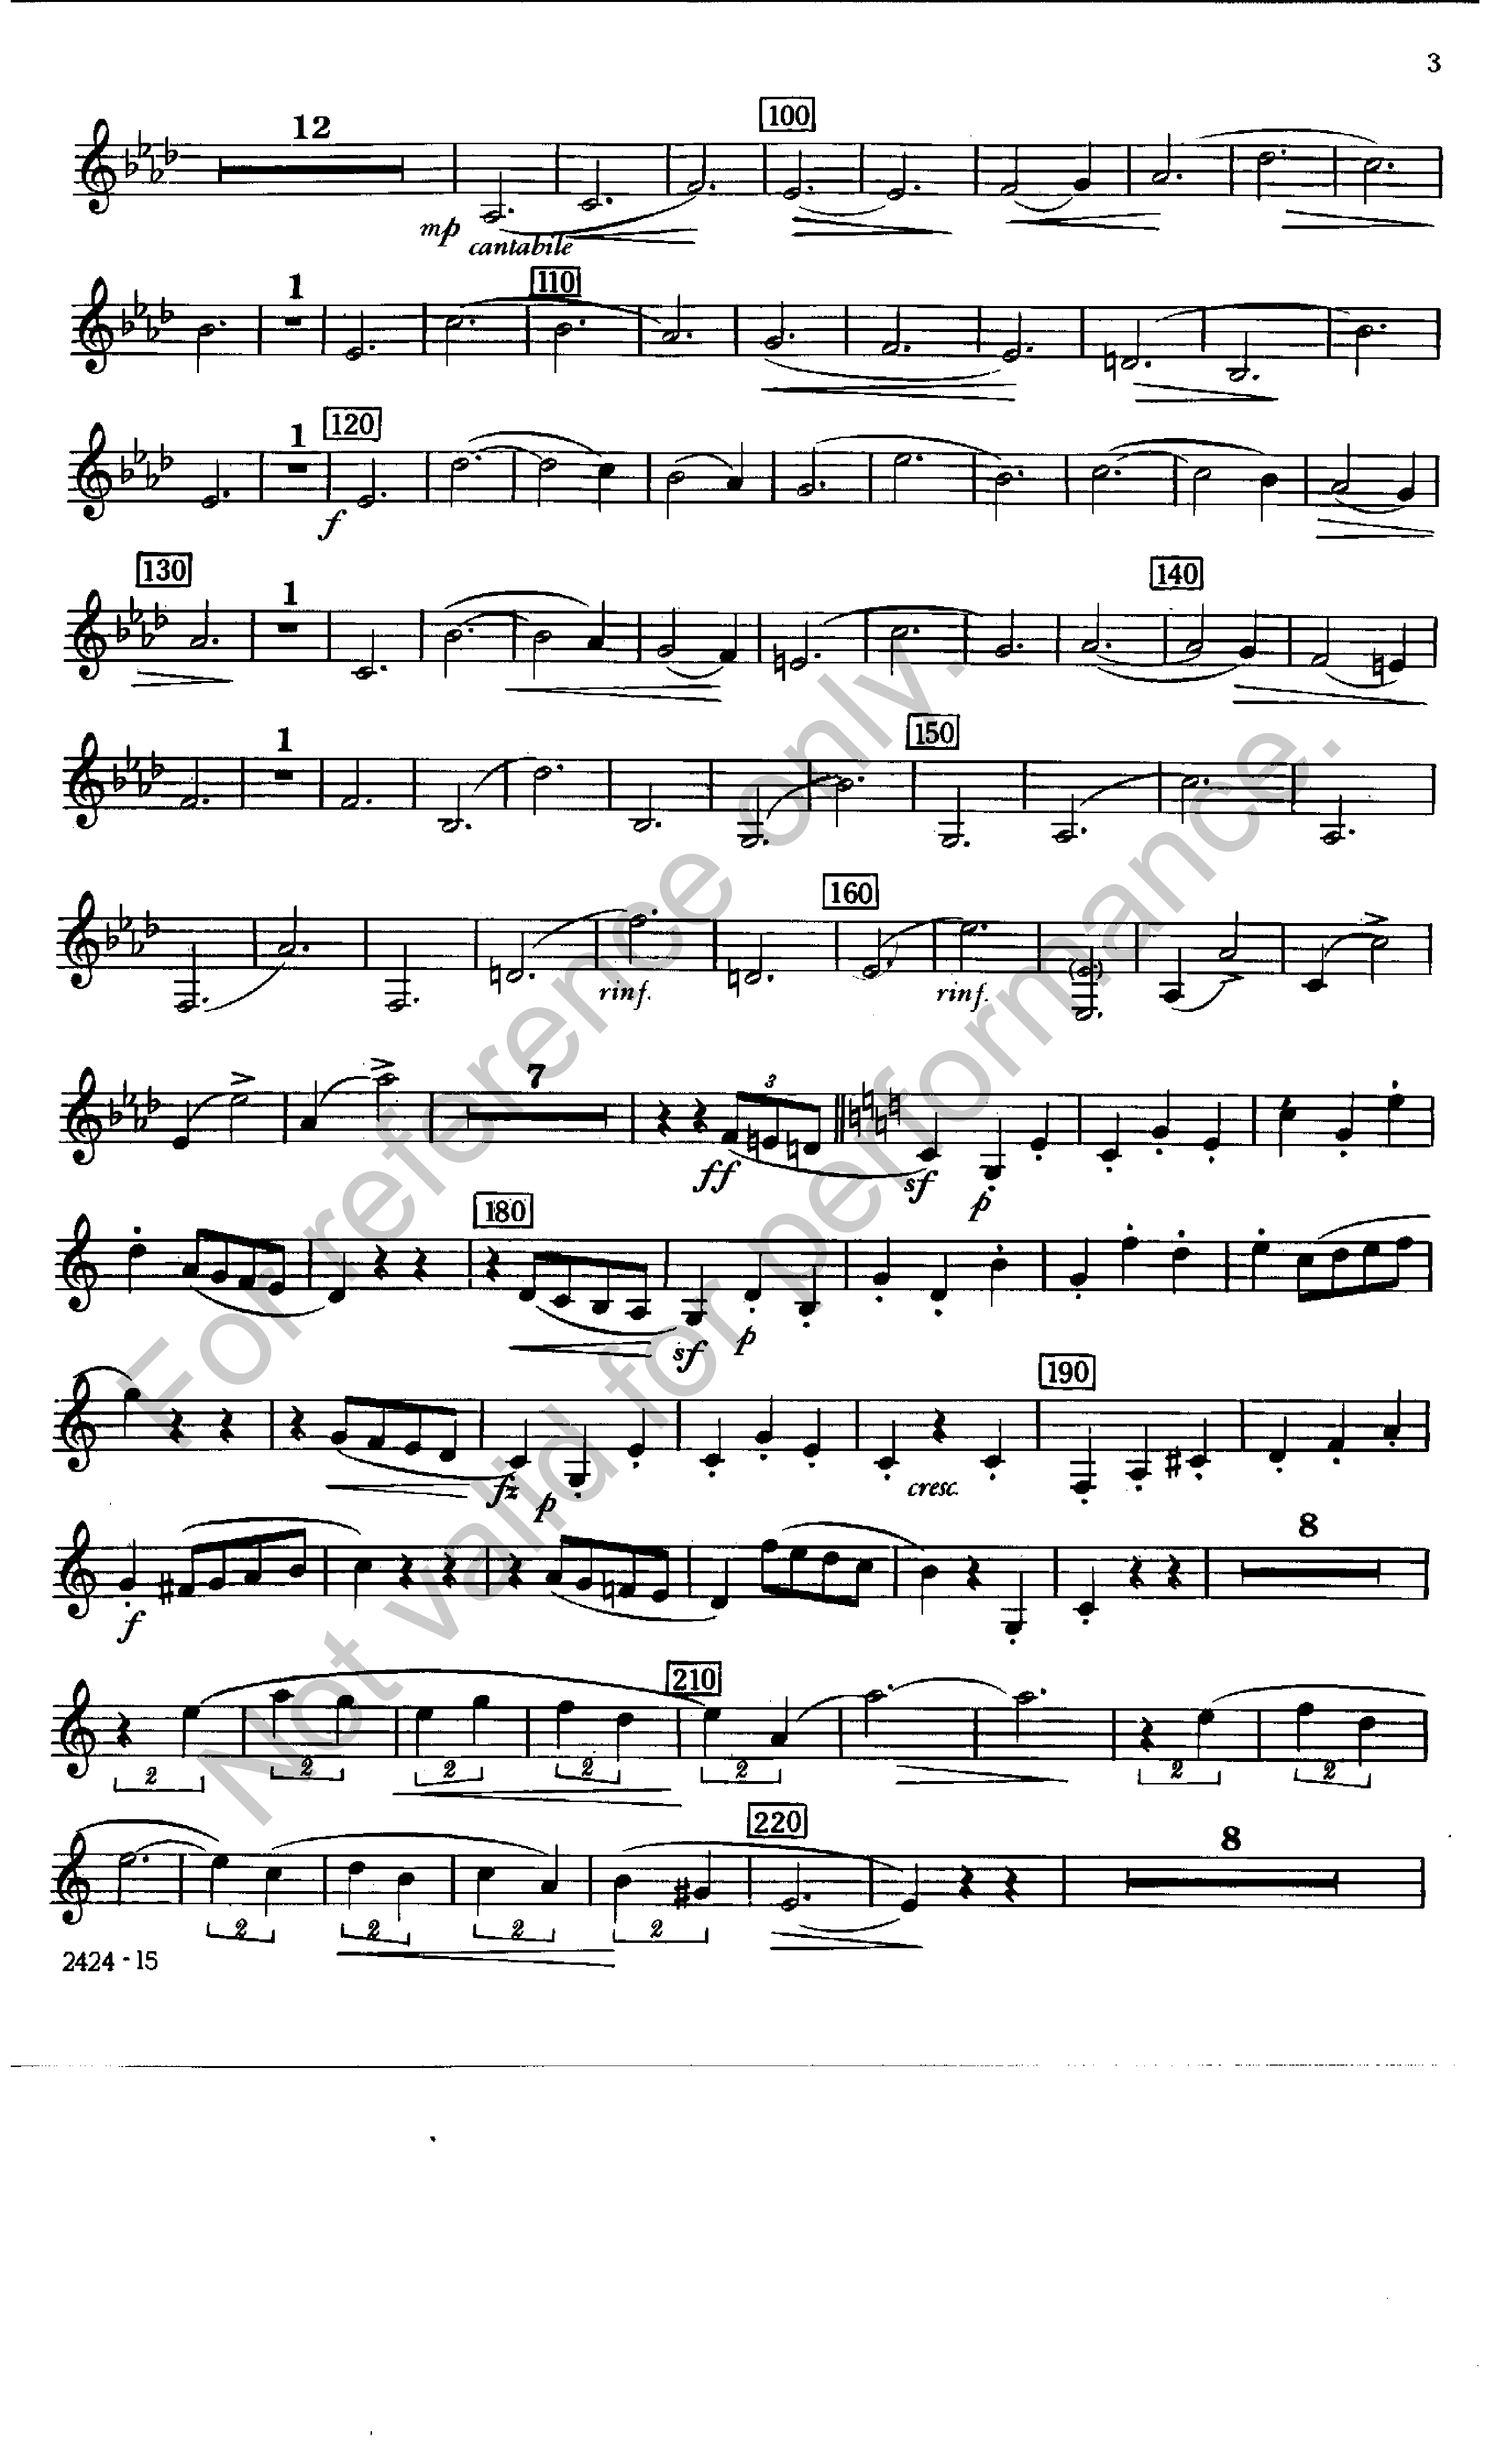 simple gifts Sheet music for Clarinet bass (Solo)